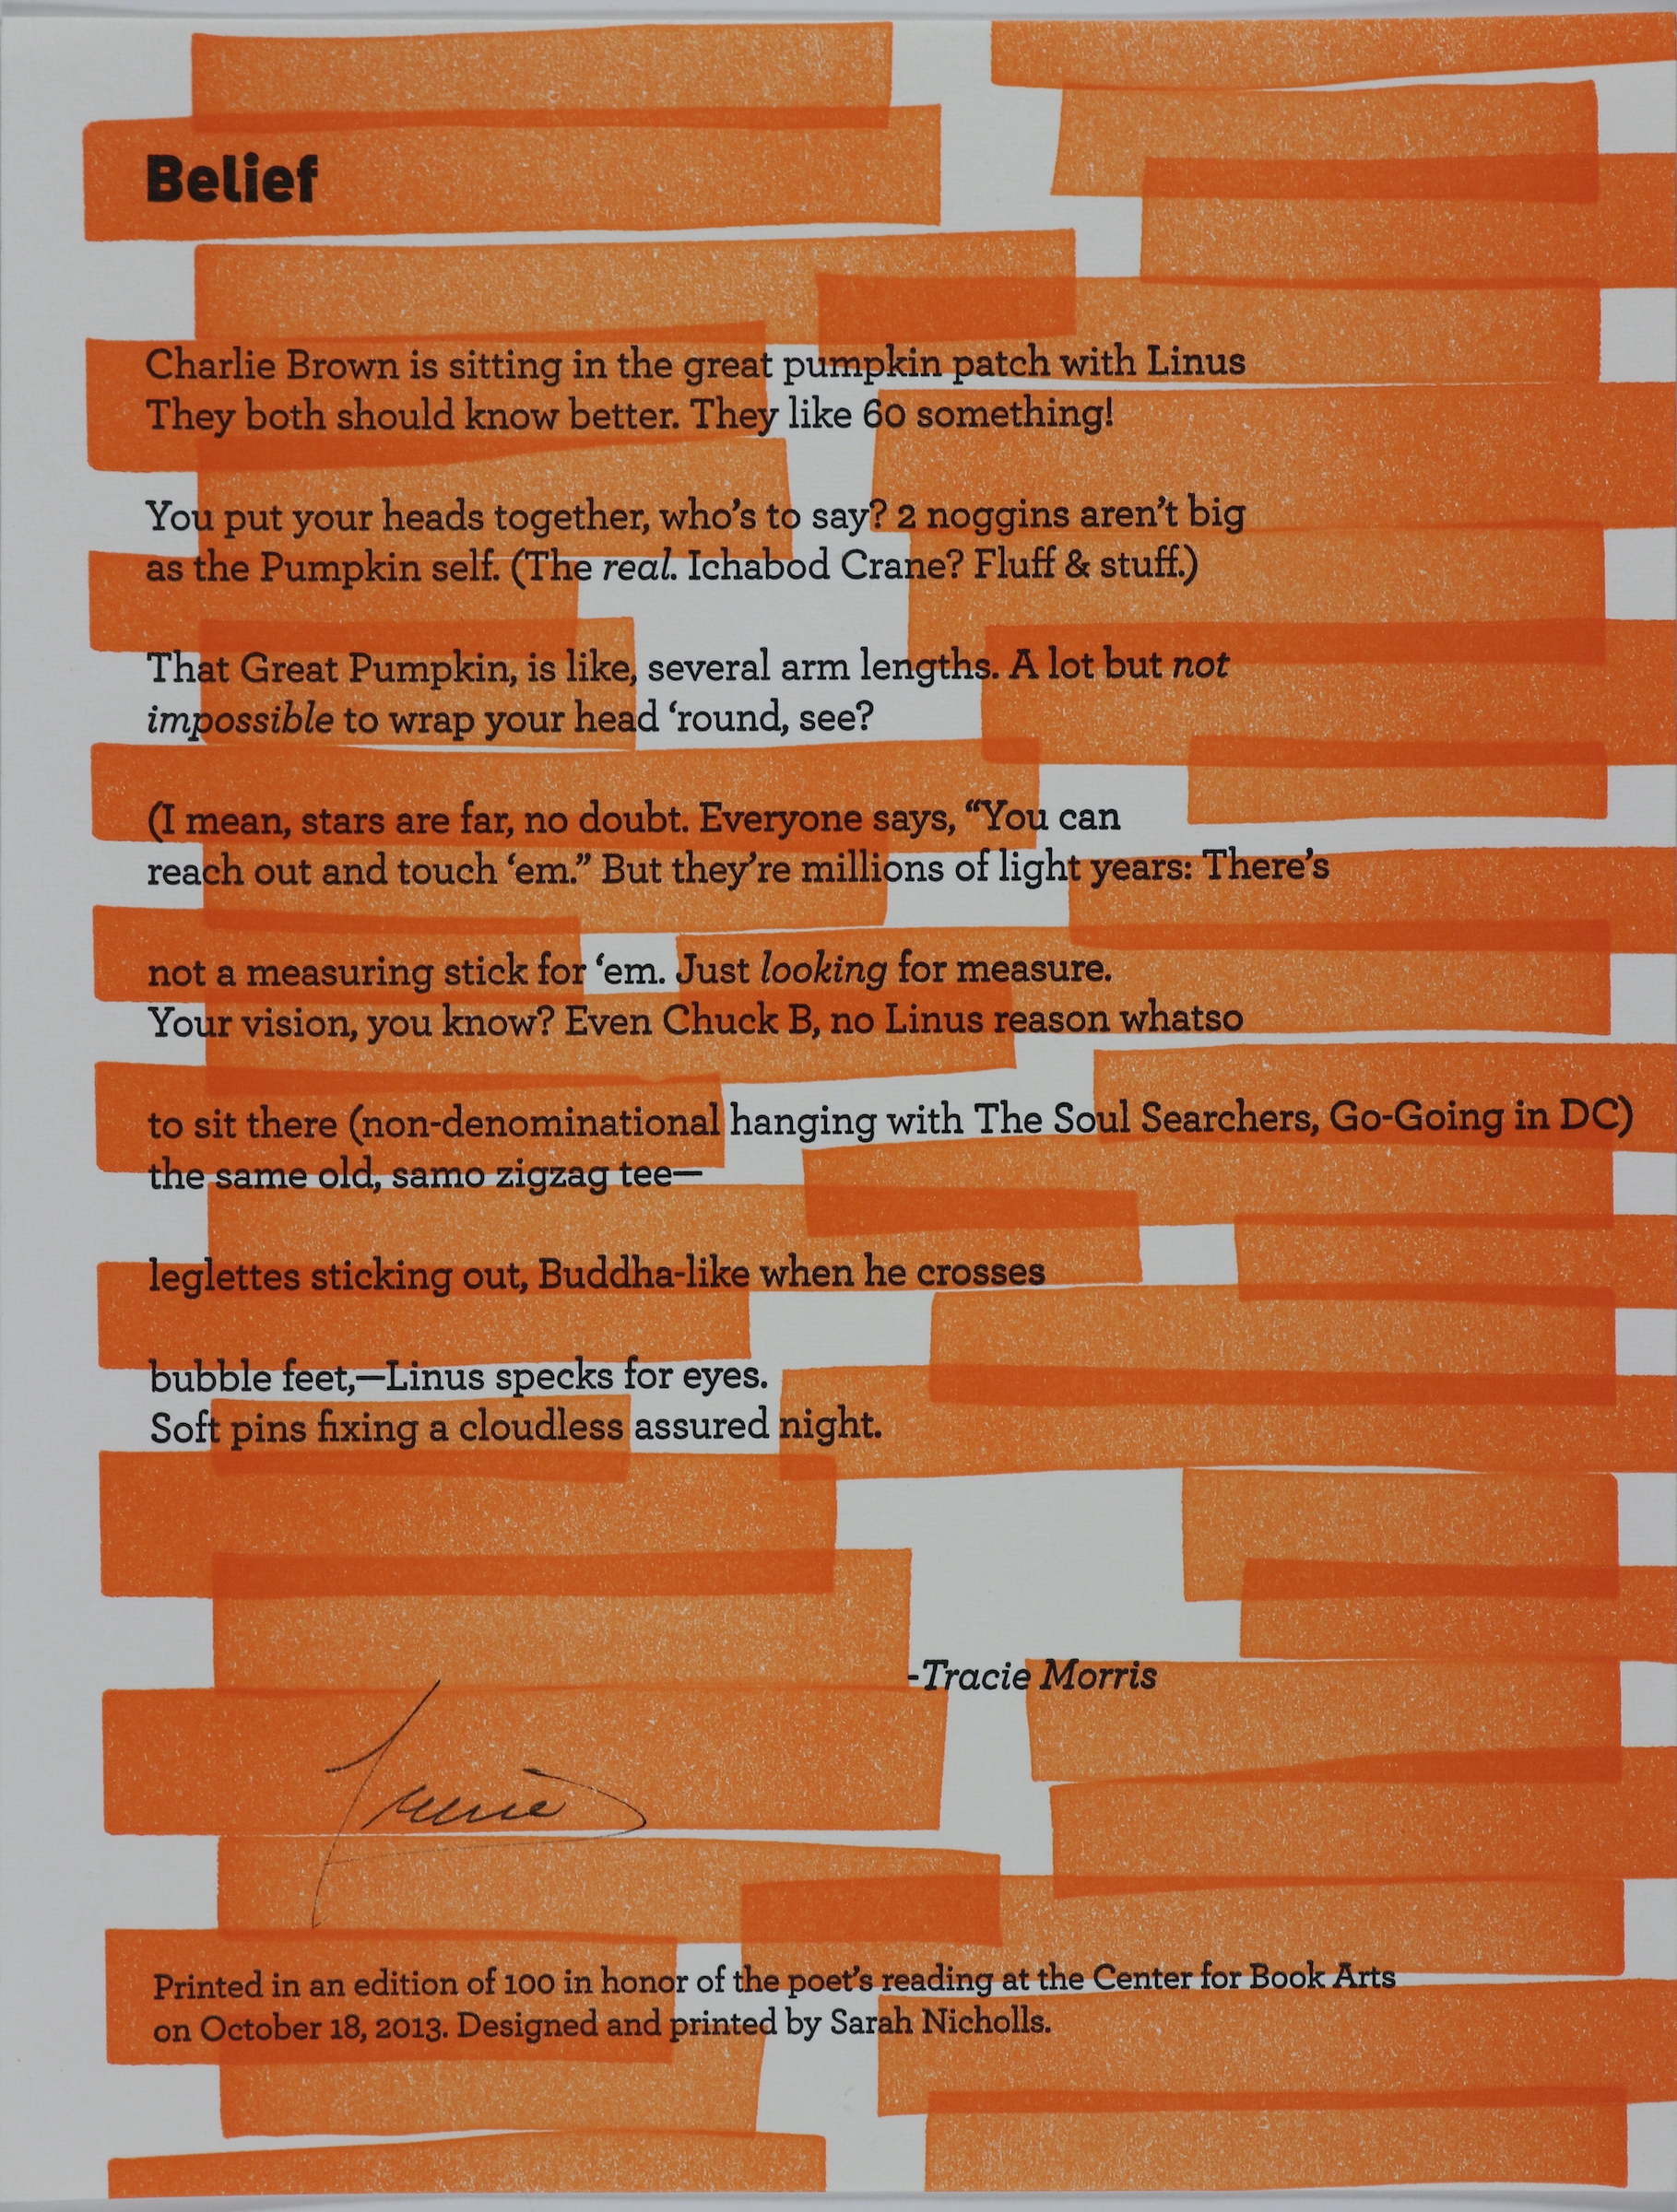 Broadside consists of a white background with orange rectangles covering almost the entirety of the broadside, with few white spaces/gaps in between the center, left and right side. The title is on the upper left corner in bolded black and the text in smaller size below. The text is centered towards the left and formatted as two sentences before each space.